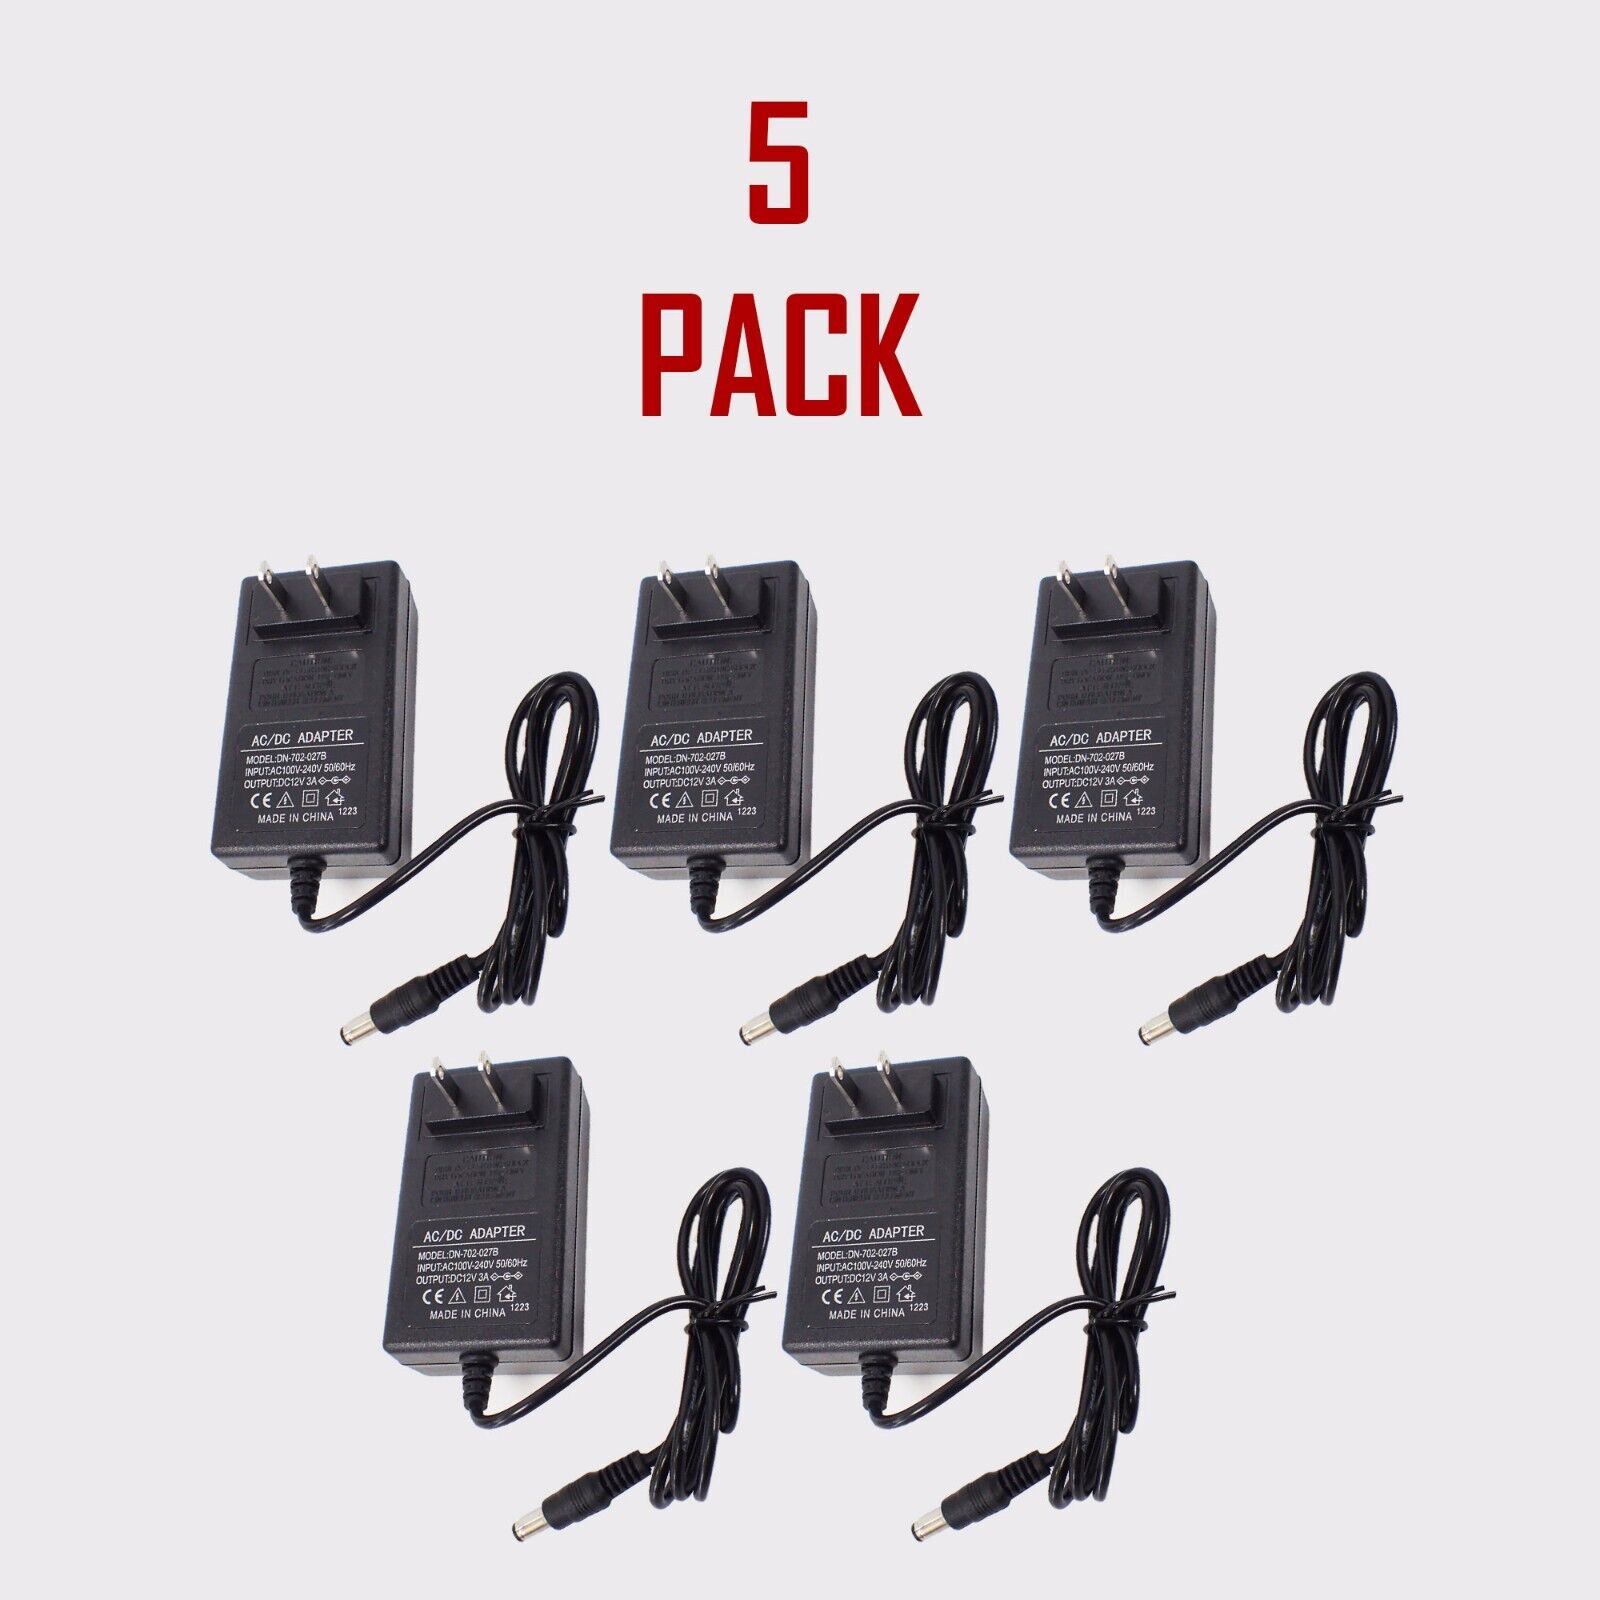 5-10 Pack 12V 3A Power Supply AC to DC Universal Adapter 5050 LED Router CCTV